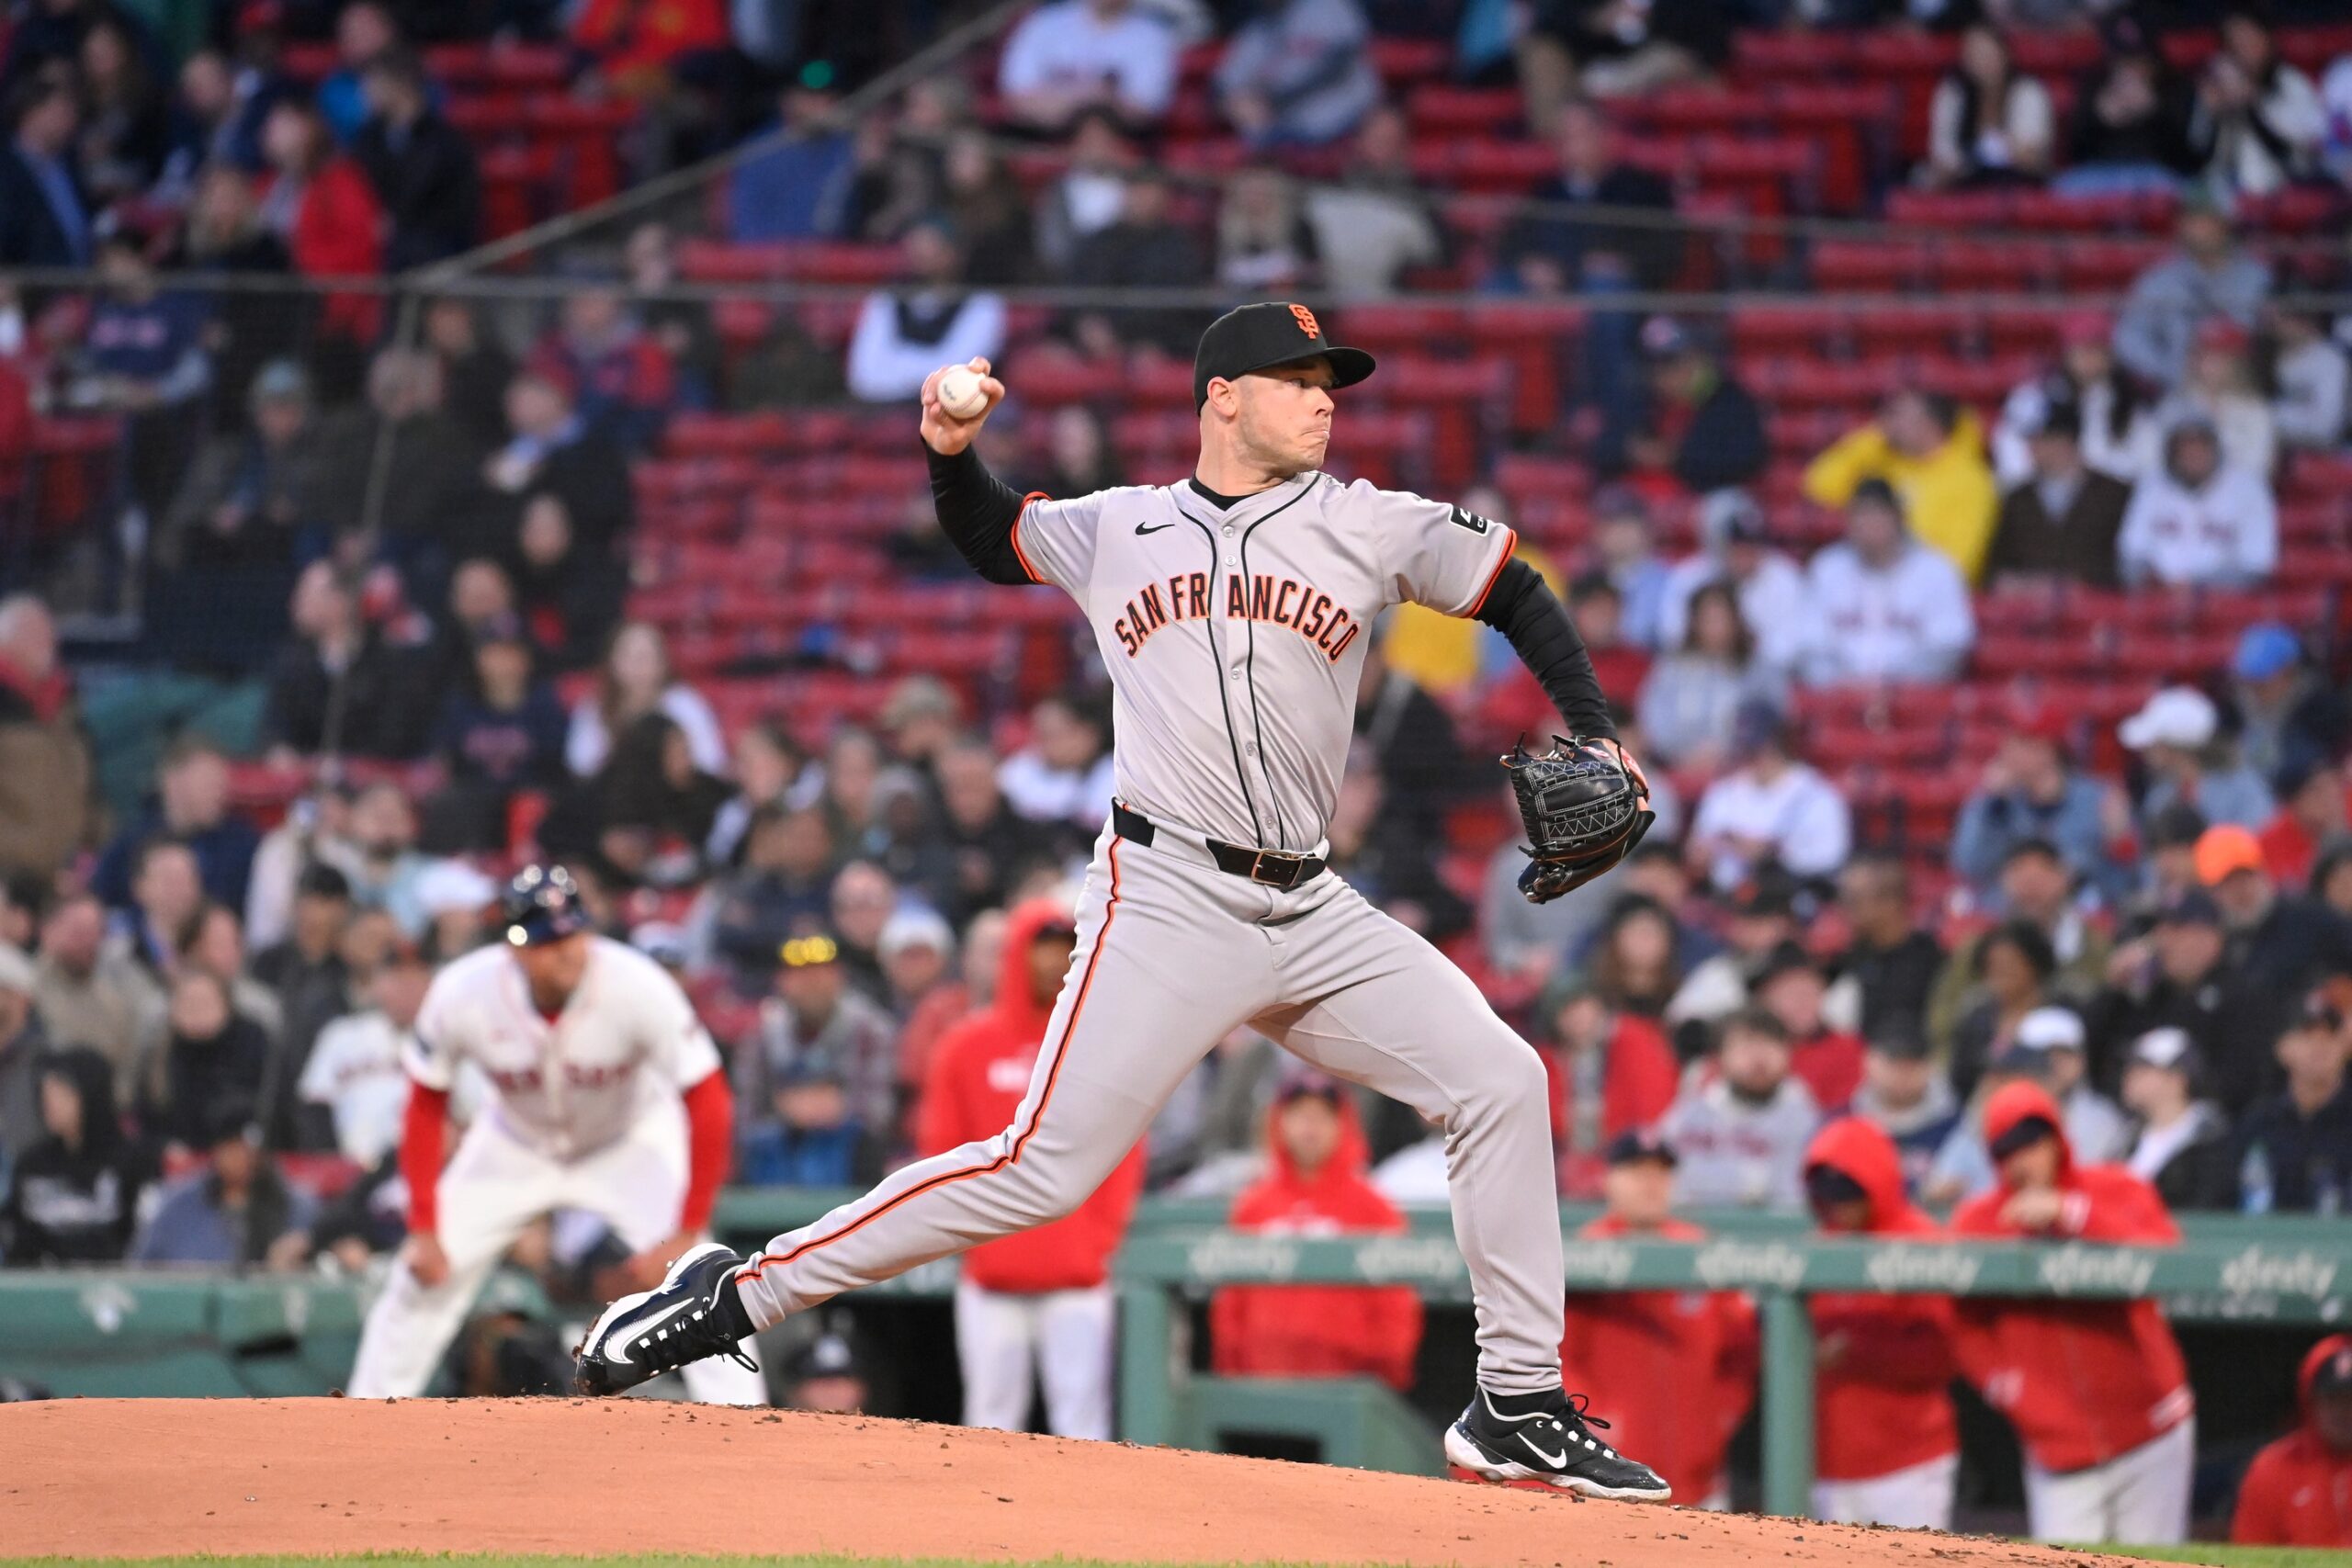 Giants Trade Hard-Luck Pitcher to Pirates